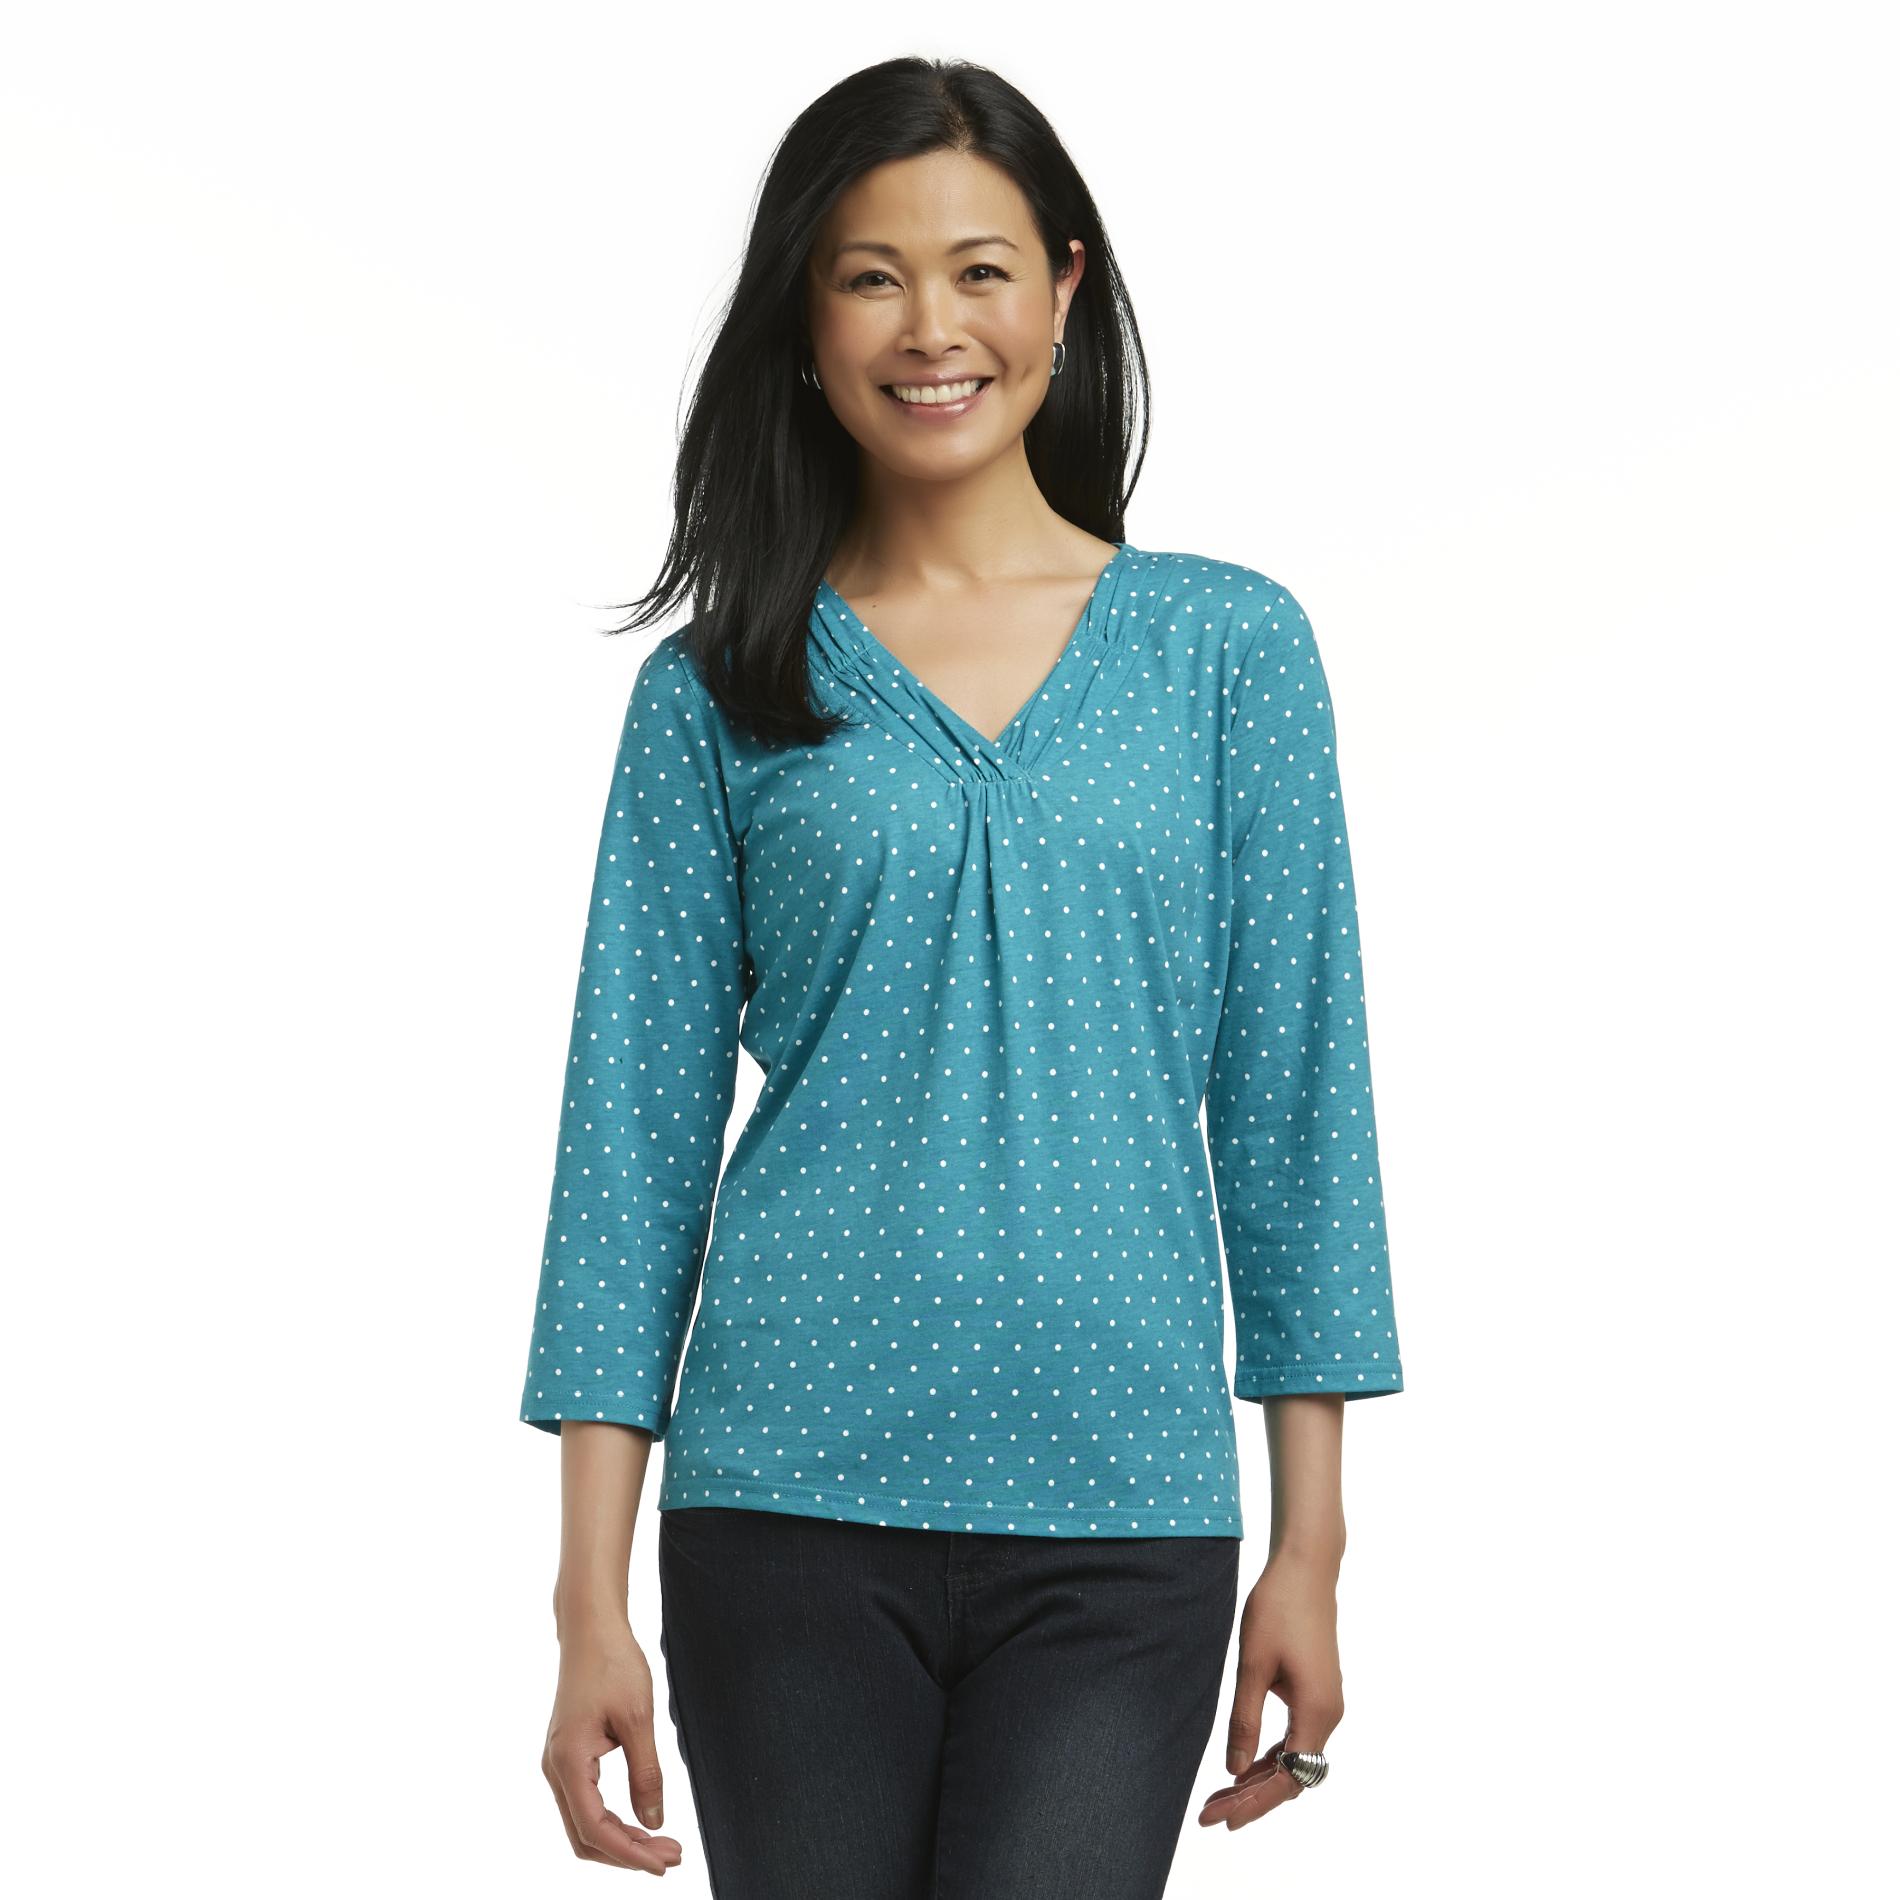 Basic Editions Women's Twisted V-Neck Top - Polka Dot